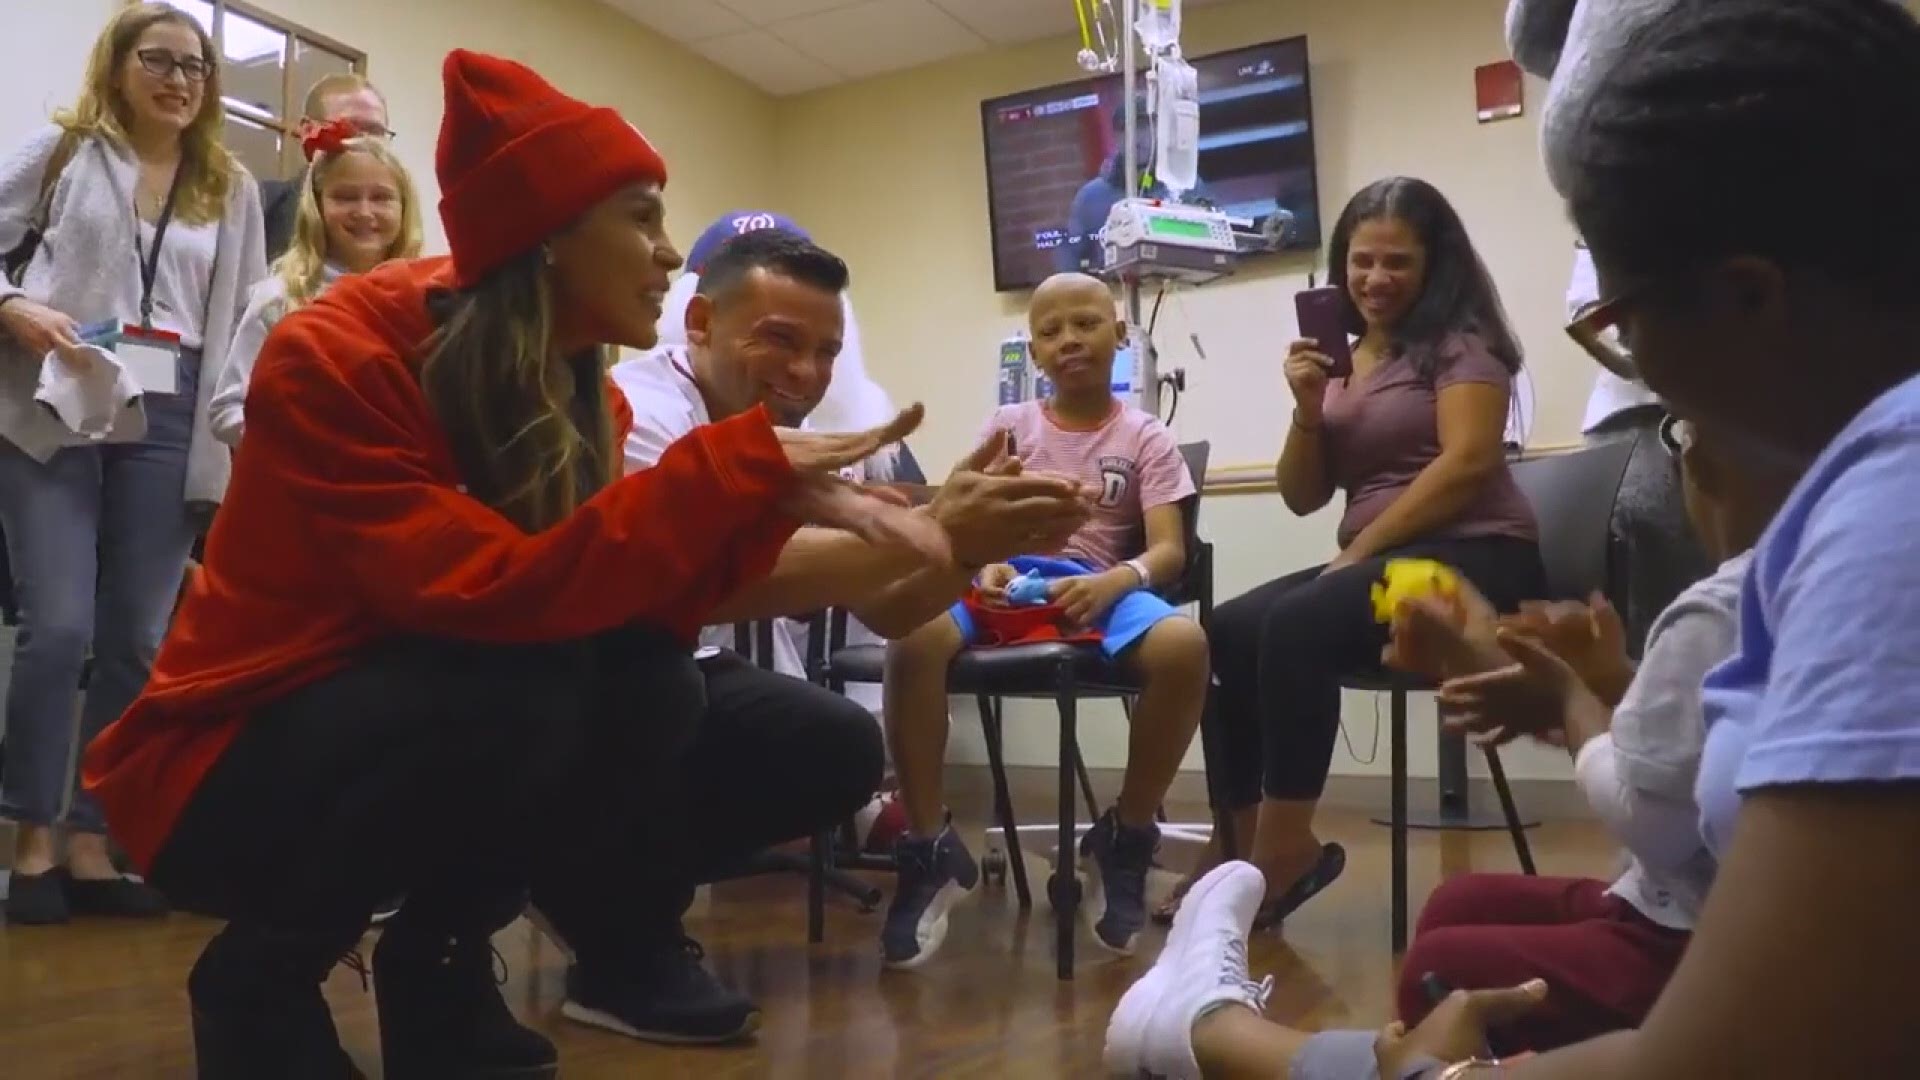 Parra visited the hospital just days before the team headed to Houston for the World Series.